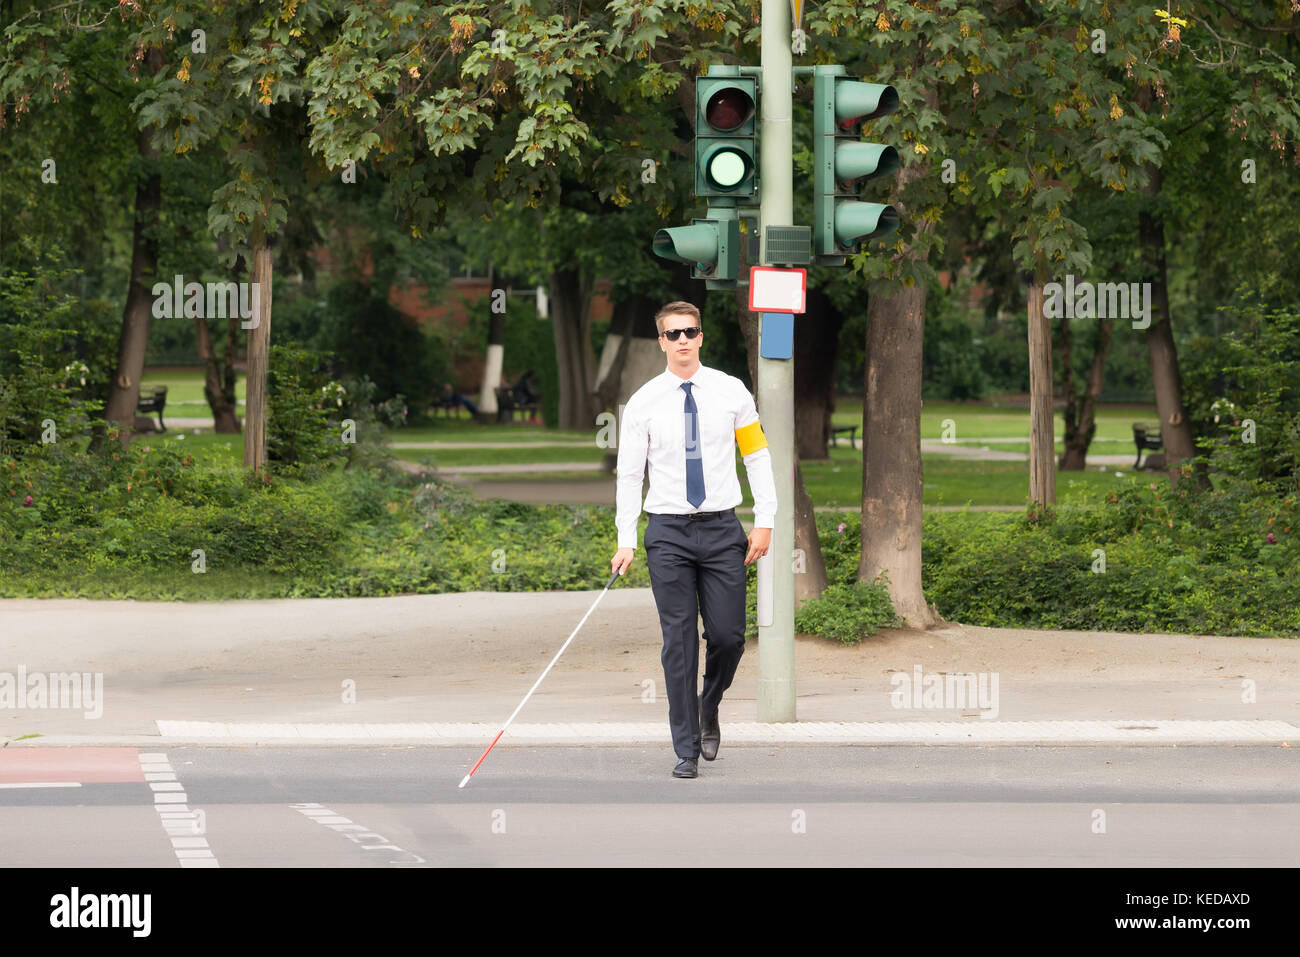 Young Blind Man Holding Stick Crossing Road Stock Photo